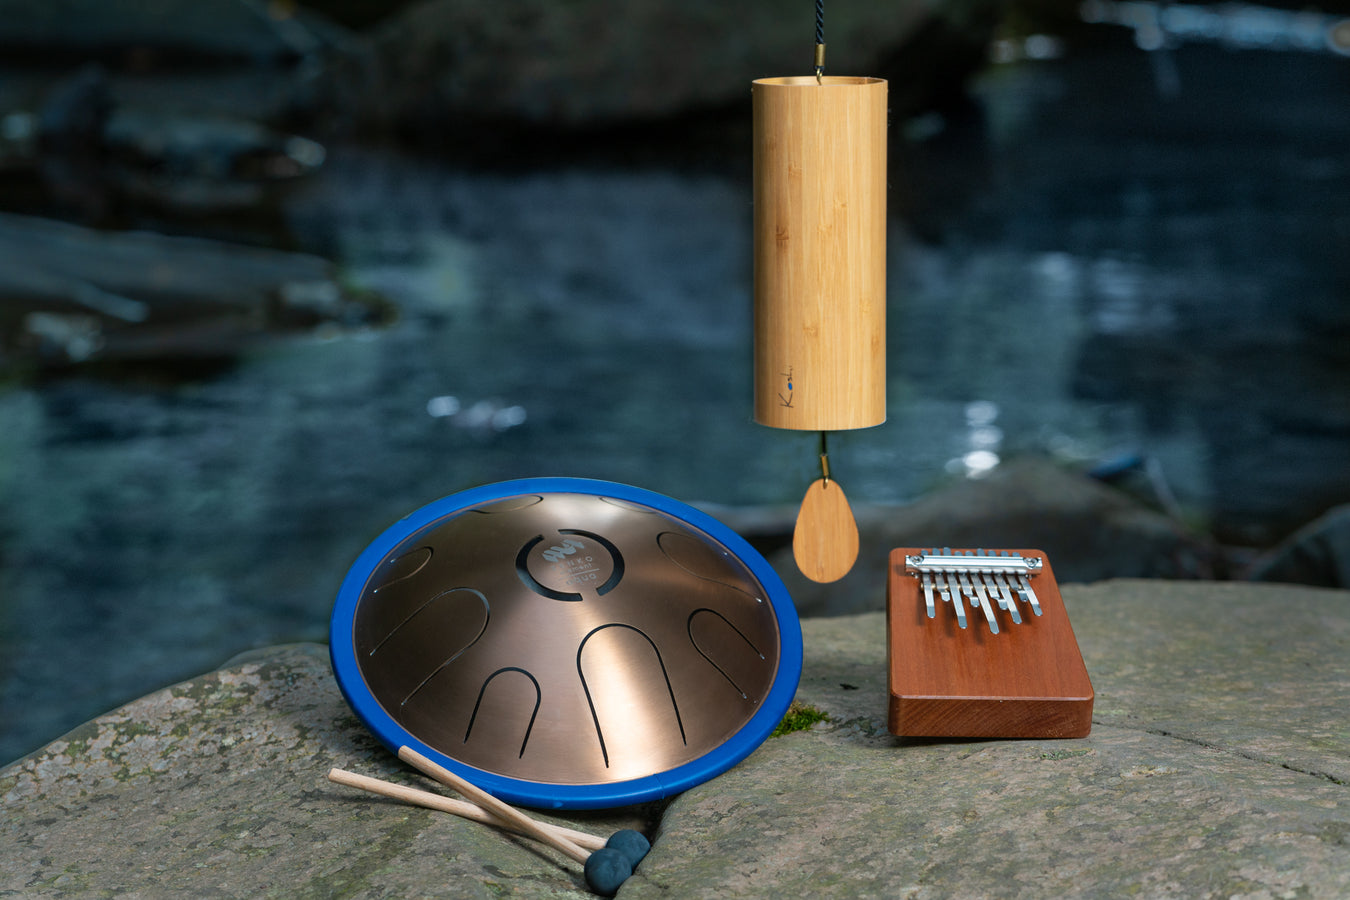 Set of instruments on a rock by the river. Aqua metal tongue drum by Metal Sound, Hokema Aqua B9 kalimba and Aqua chime by Koshi all tuned into water element. | weplaywelltogether